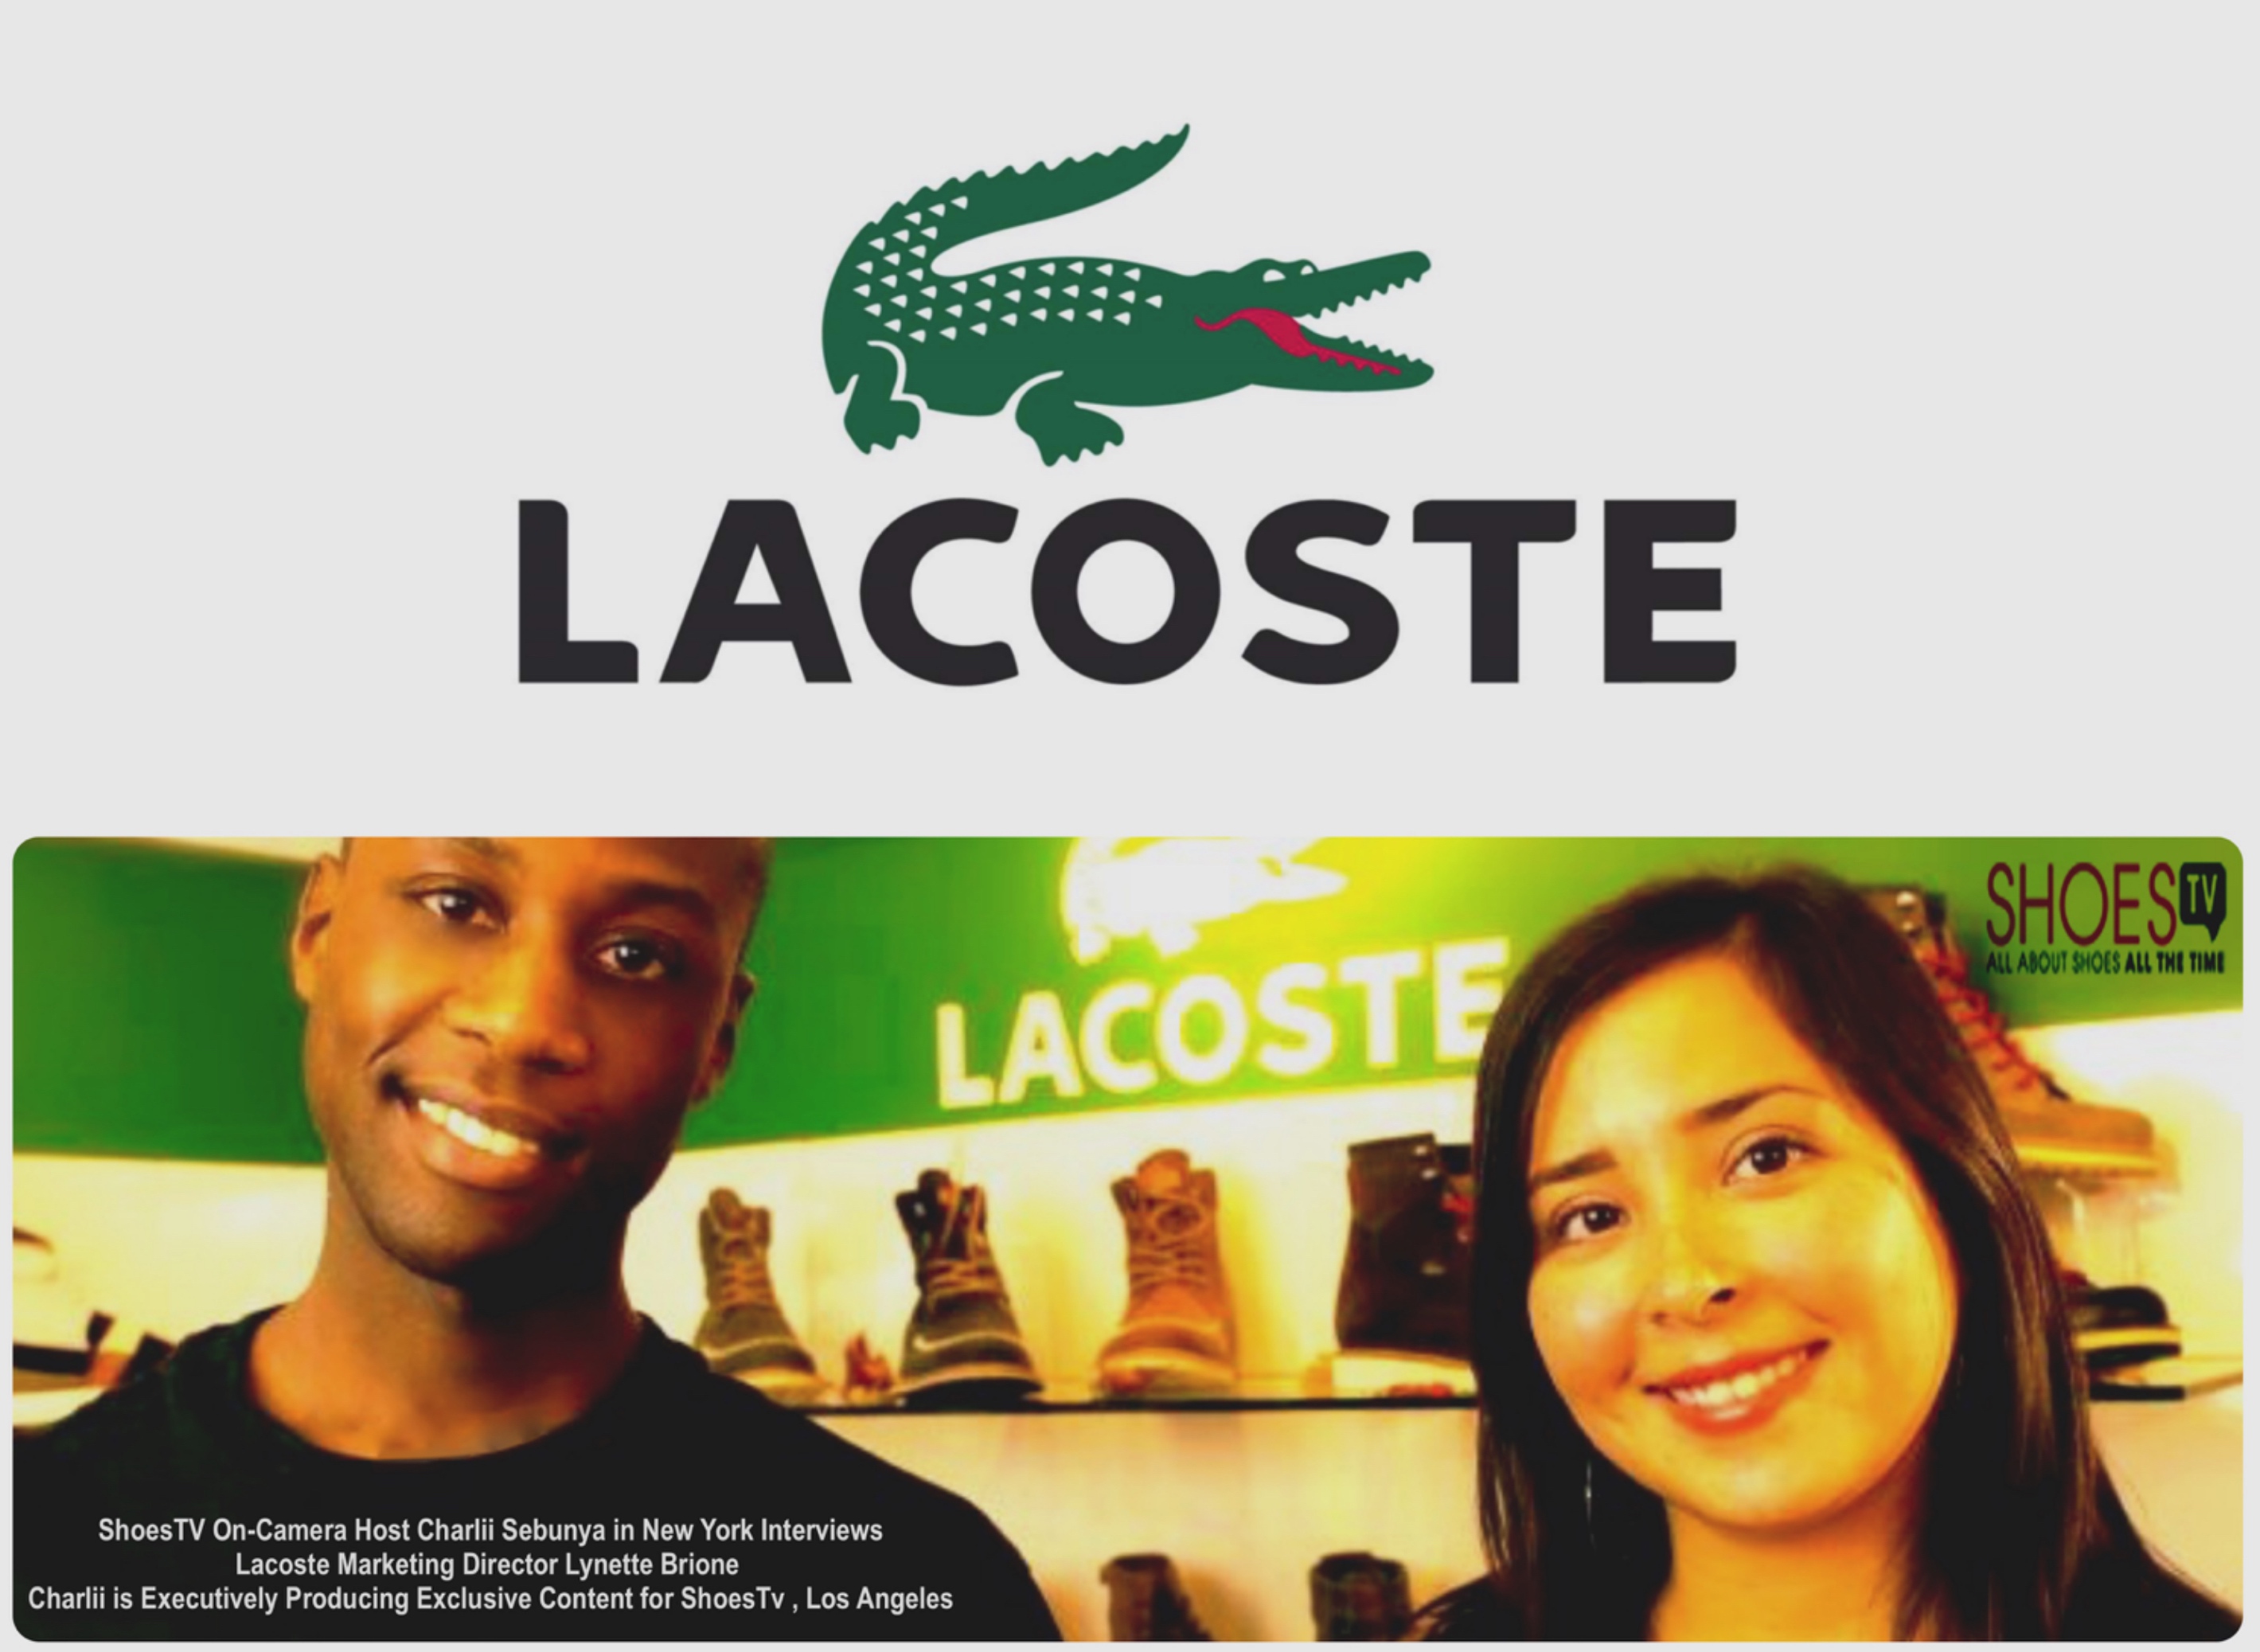 ShoesTV On-Camera Host Charlii Sebunya in New York Interviews Lacoste Marketing Director Lynette Brione. Charlii is Executively Producing Exclusive Content for ShoesTv, Los Angeles